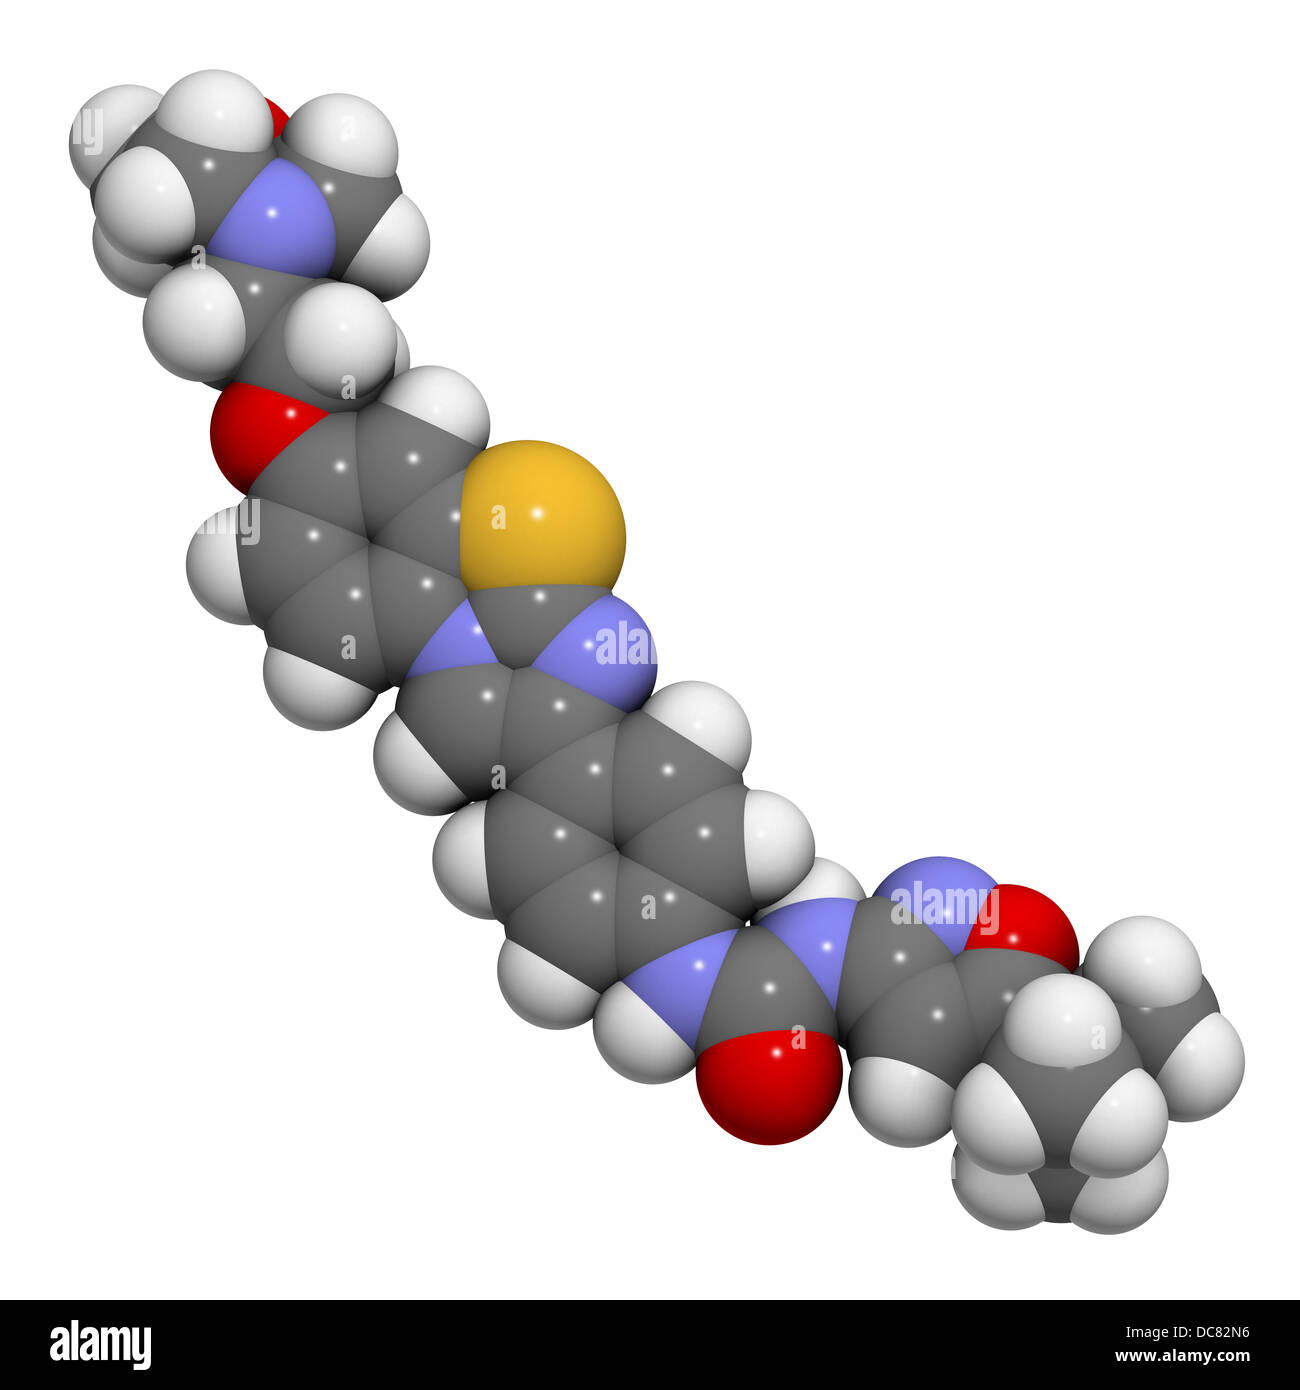 Quizartinib investigational acute myeloid leukemia (AML) drug, chemical structure Atoms are represented as spheres. Stock Photo